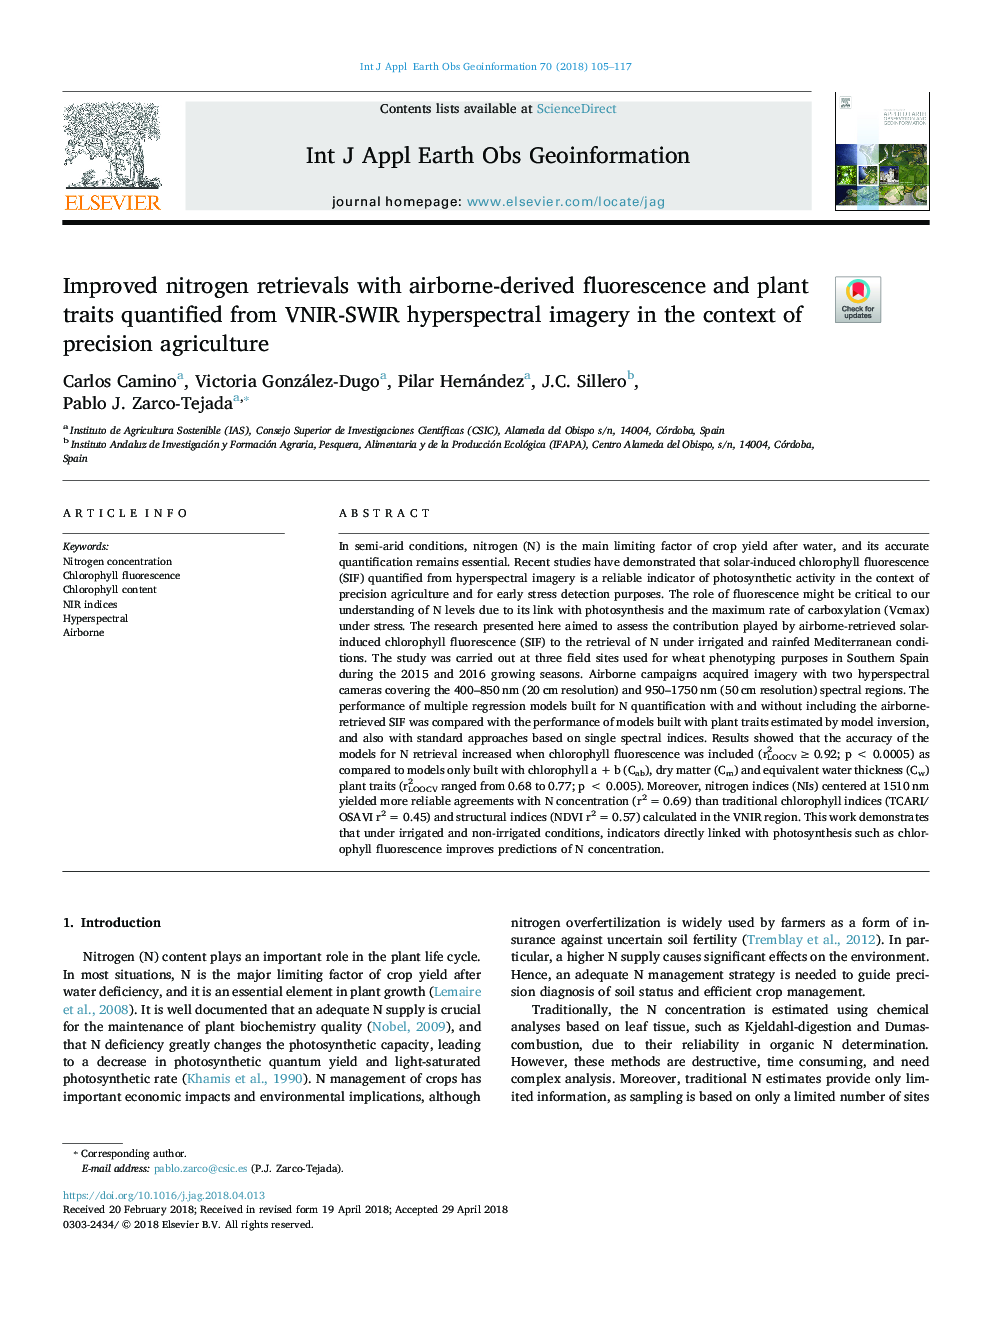 Improved nitrogen retrievals with airborne-derived fluorescence and plant traits quantified from VNIR-SWIR hyperspectral imagery in the context of precision agriculture